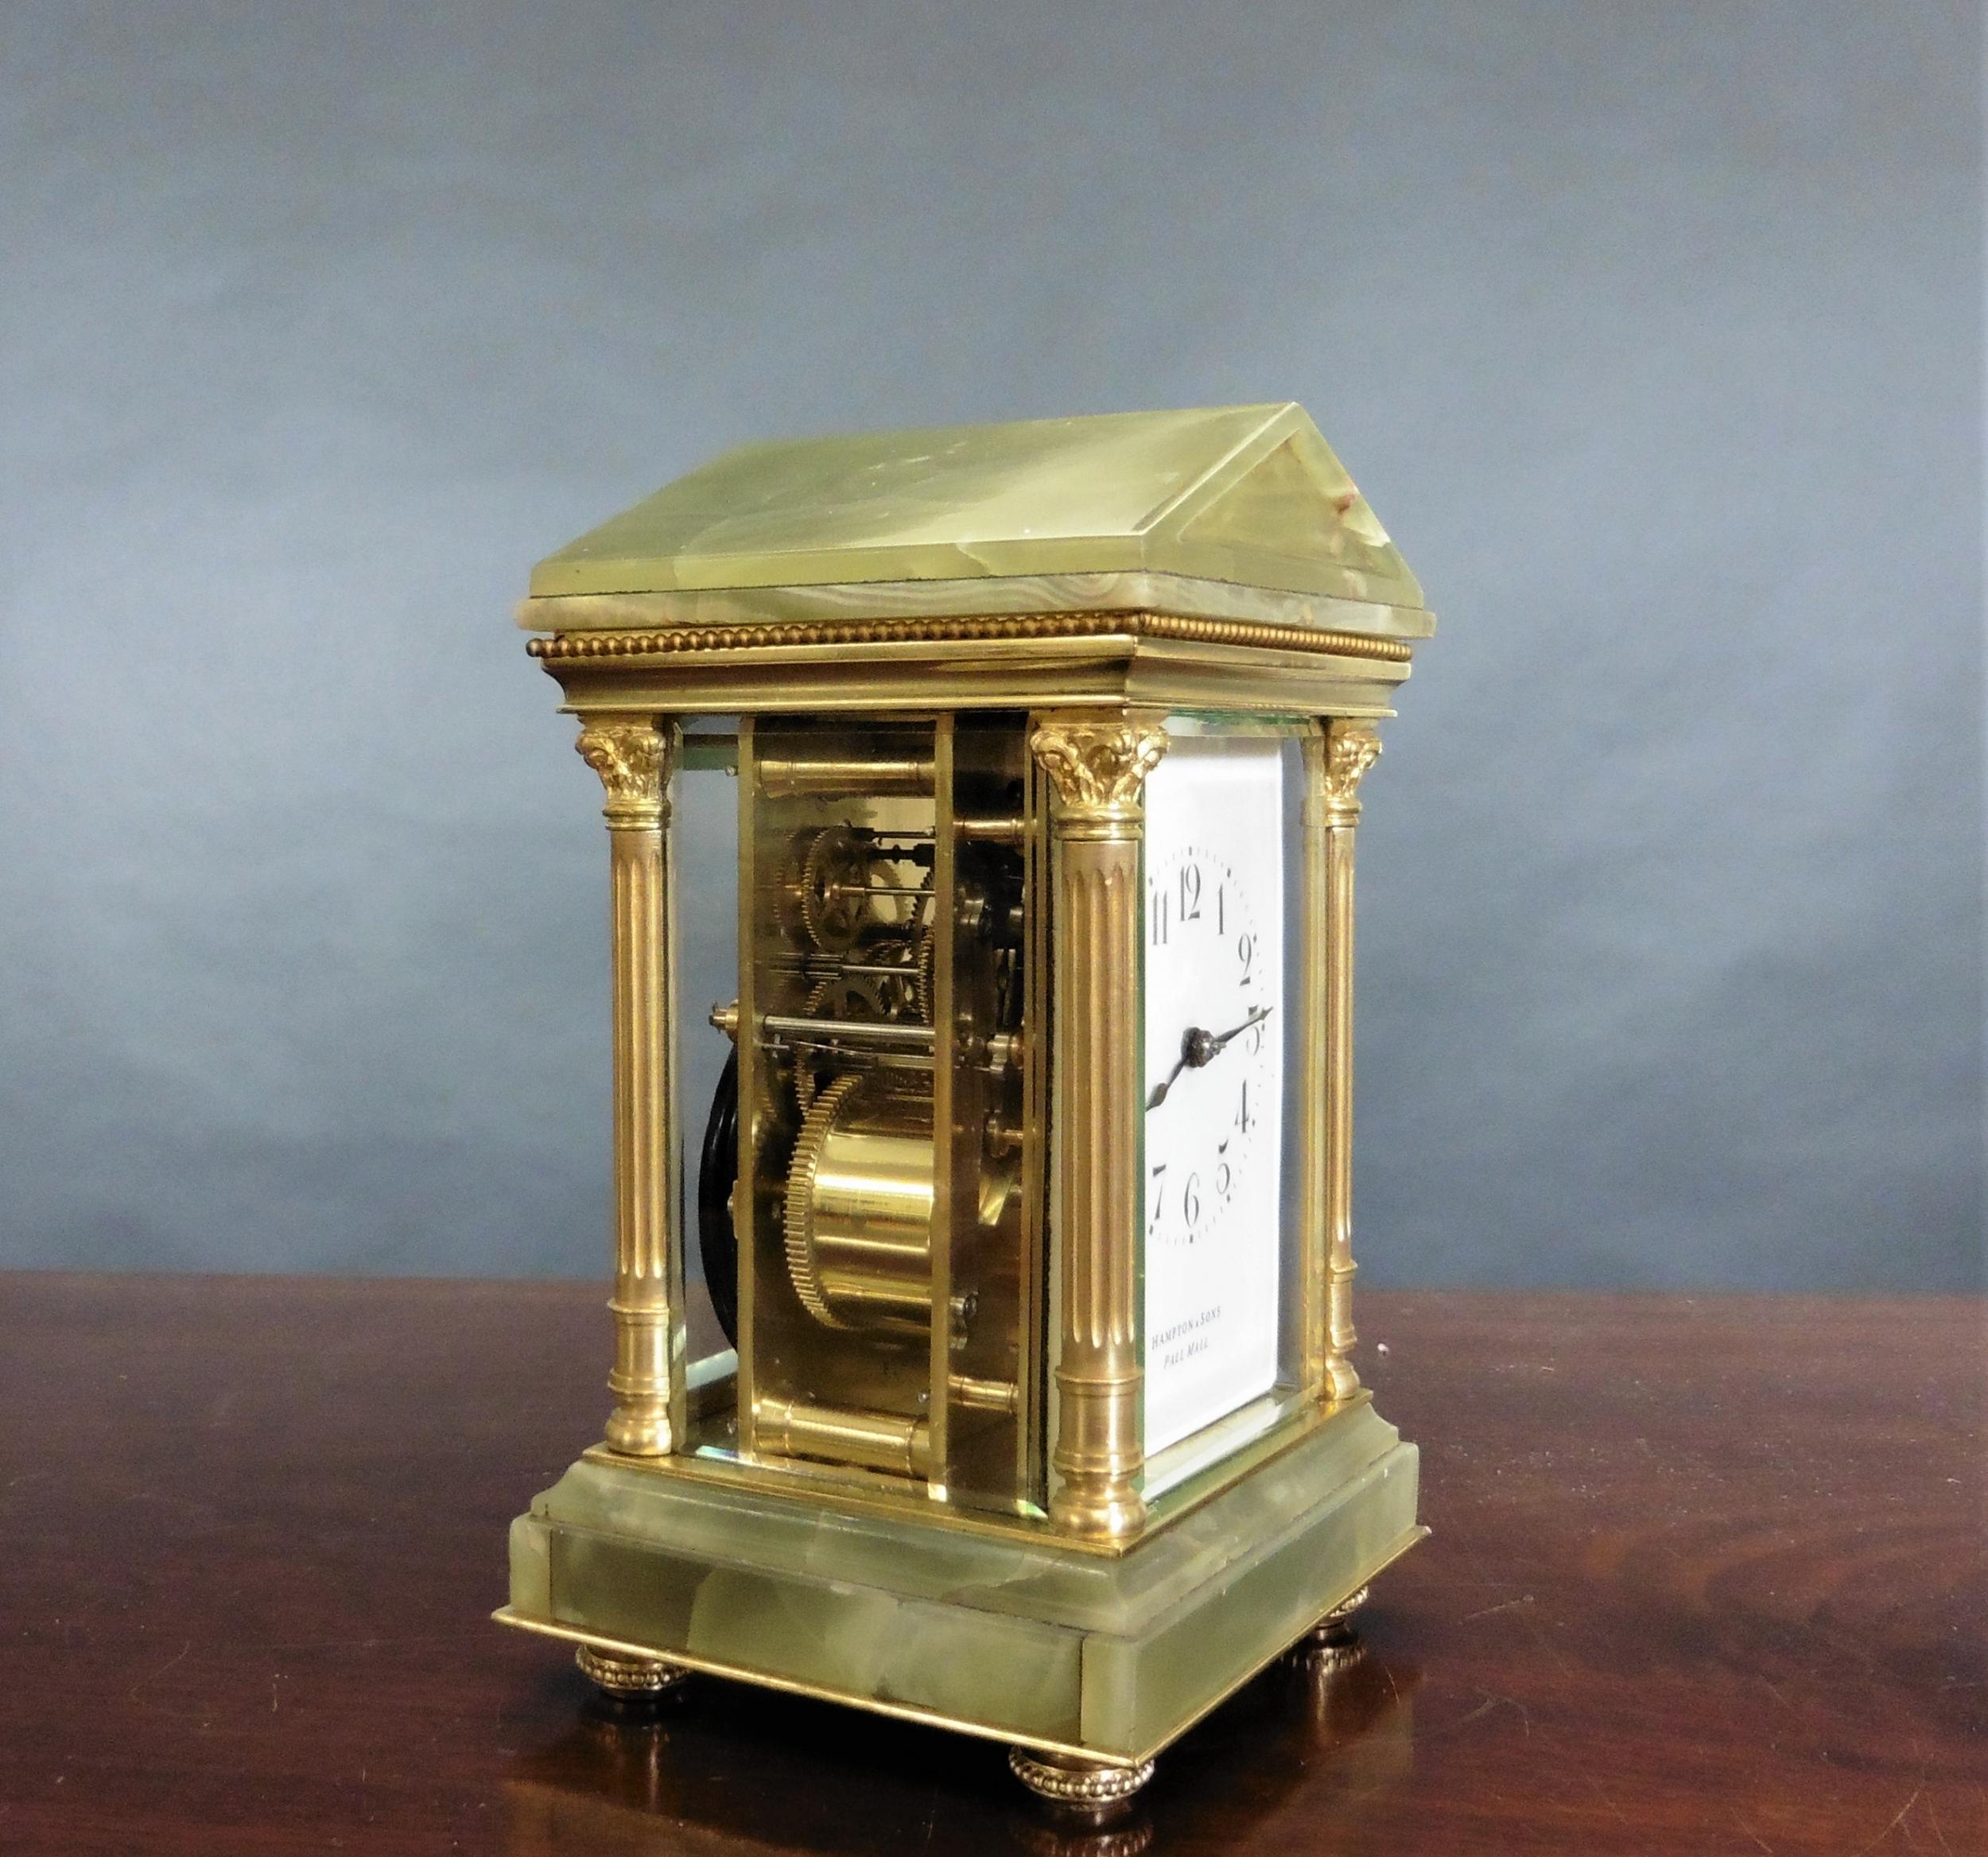 Victorian striking carriage clock, Hampton & Sons, Pall Mall



Victorian carriage clock in a fine variegated green onyx case standing on a raised, stepped base and resting on gilded feet with reeded pillars and Corinthian capitals supporting a